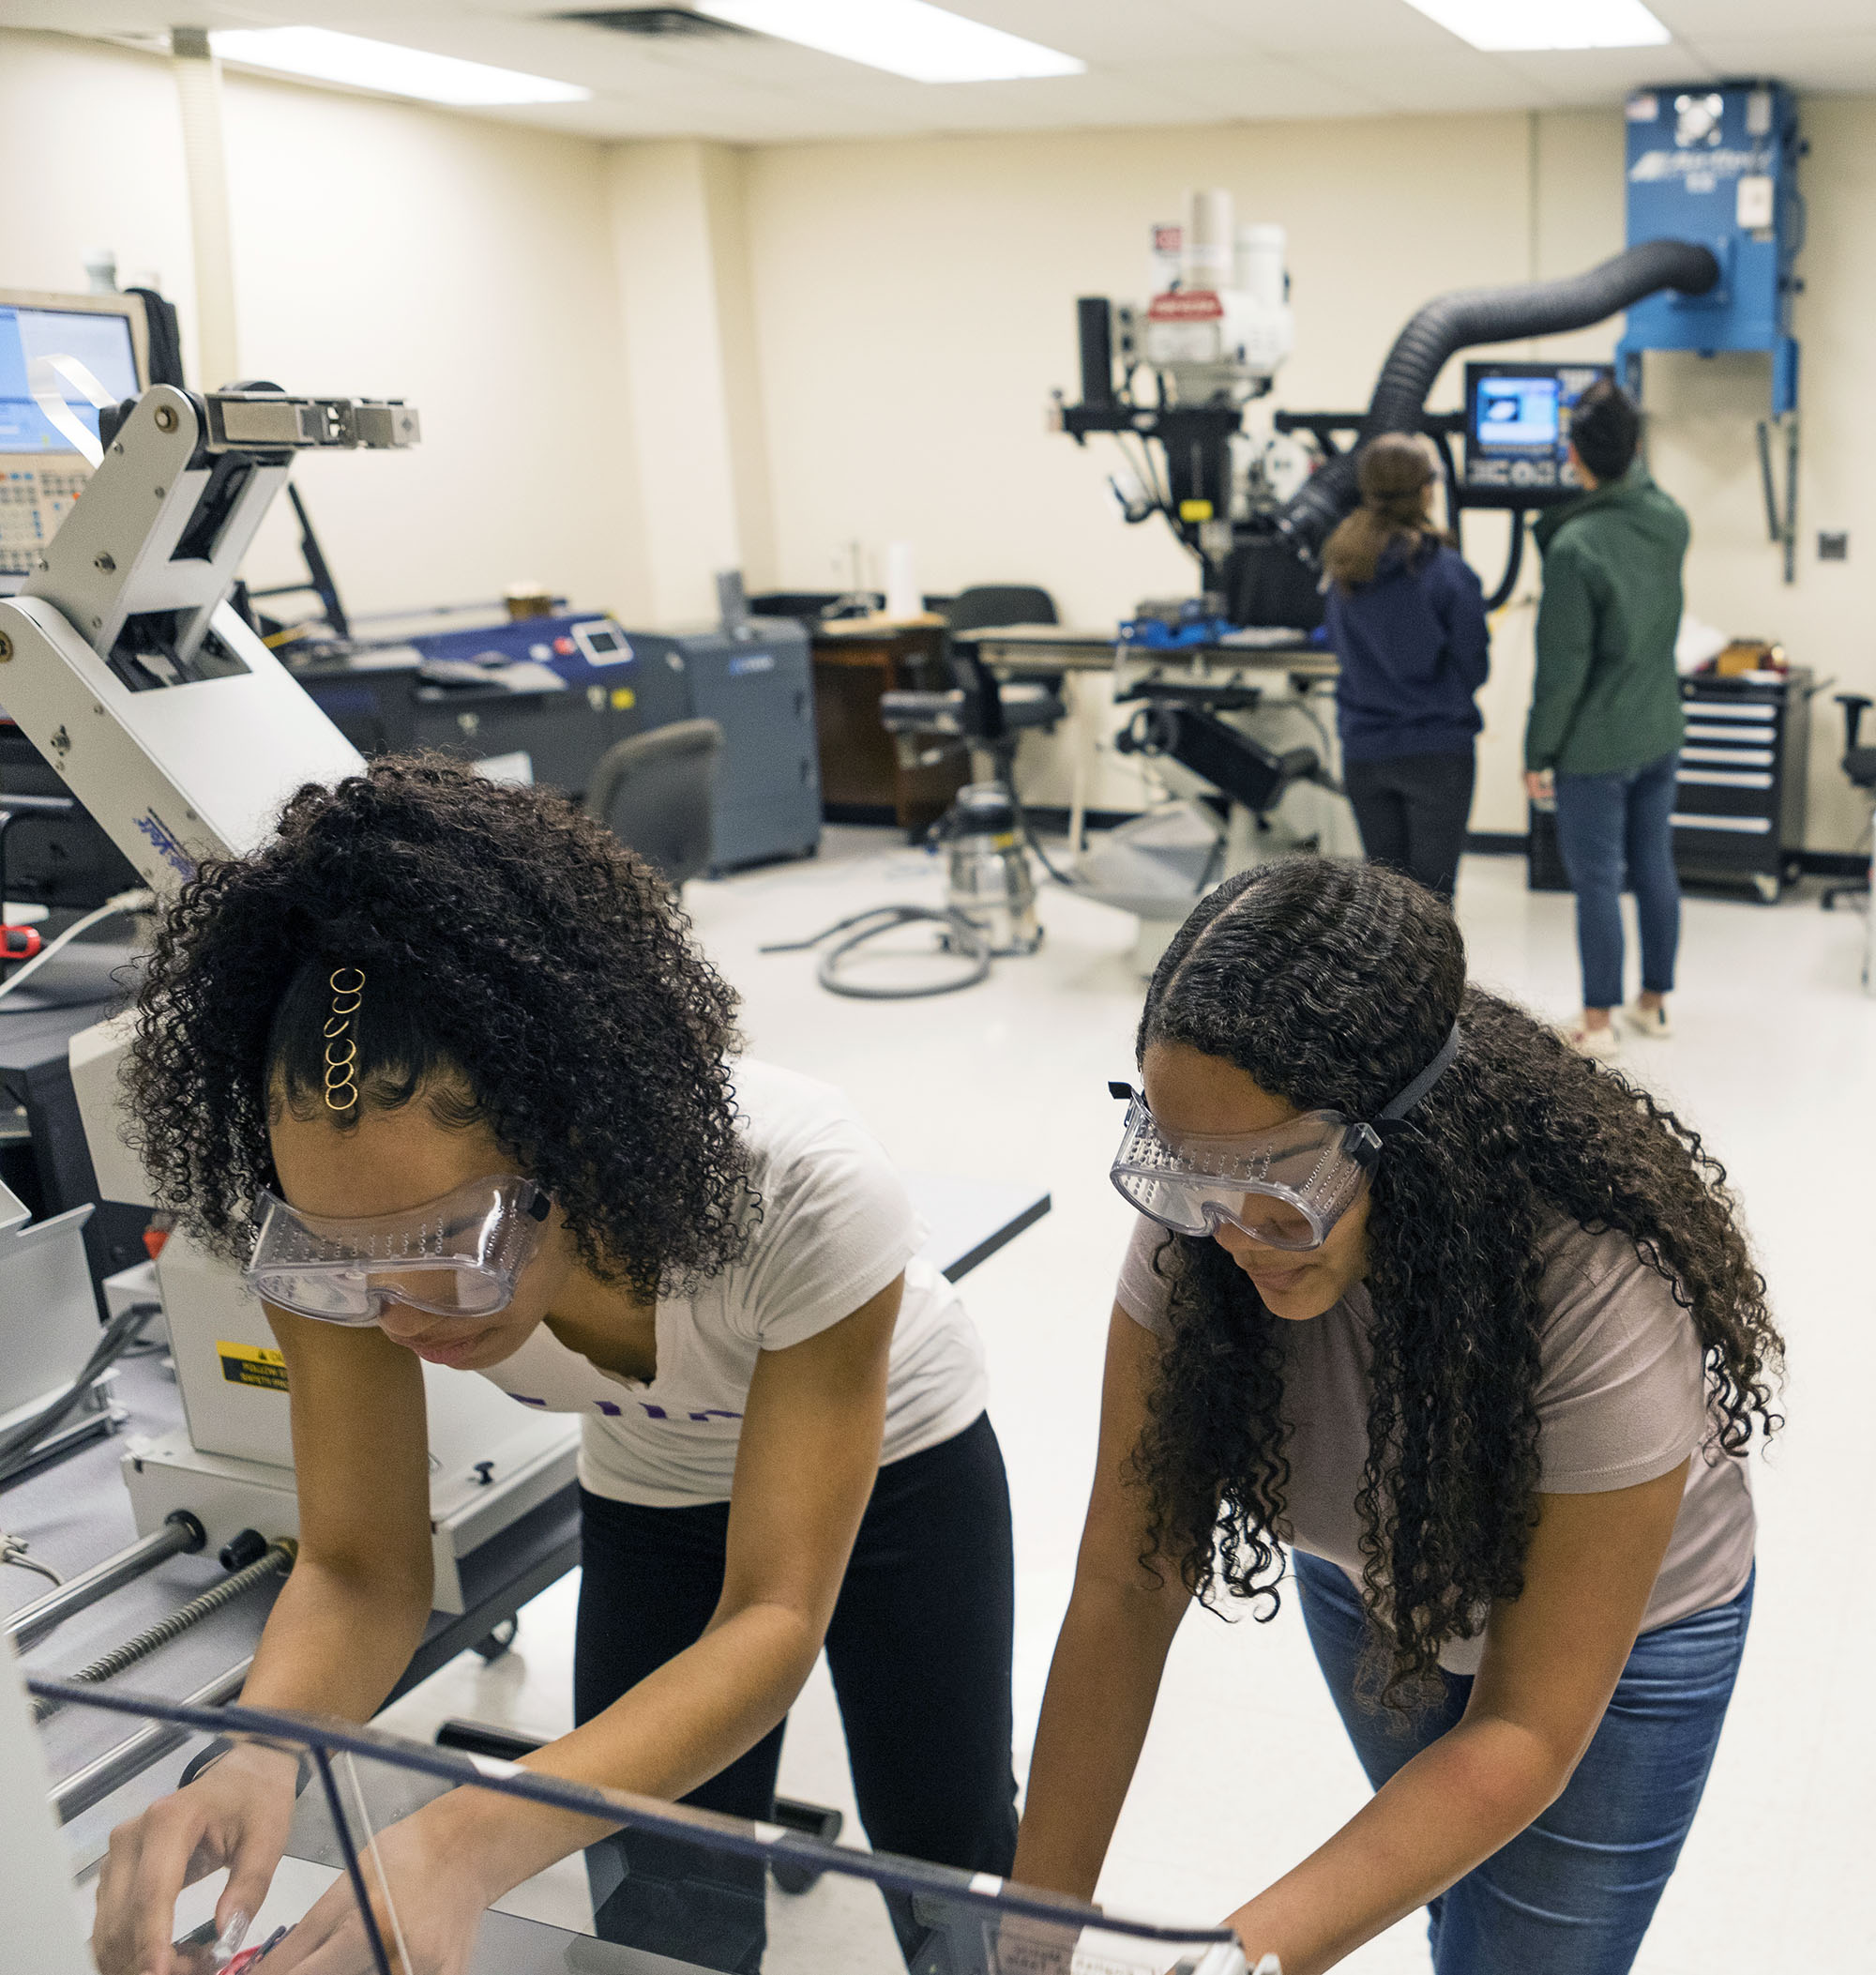 Two female students wear goggles and work in an engineering lab.